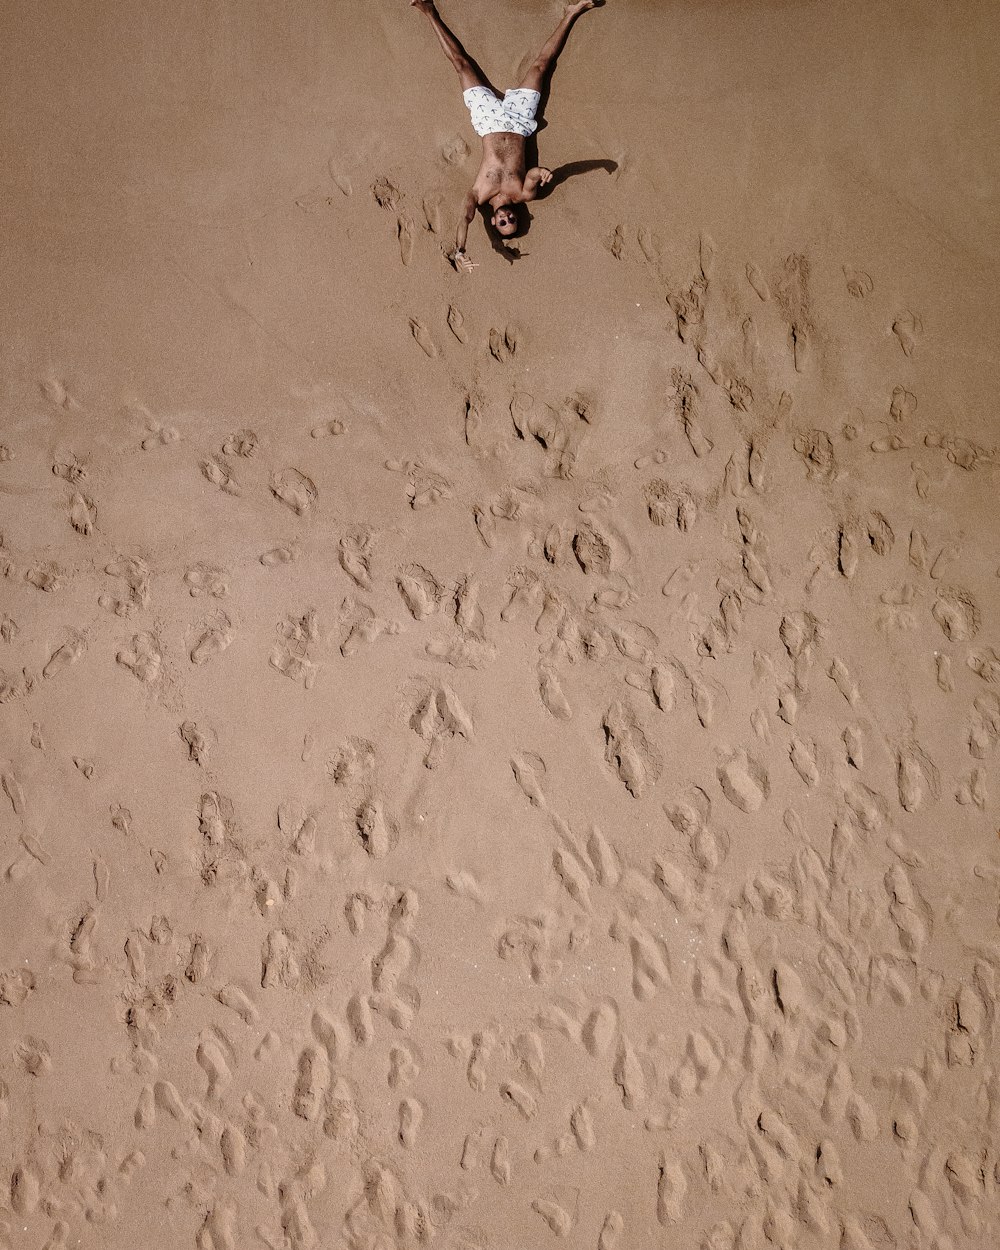 a person standing in the middle of a sandy beach